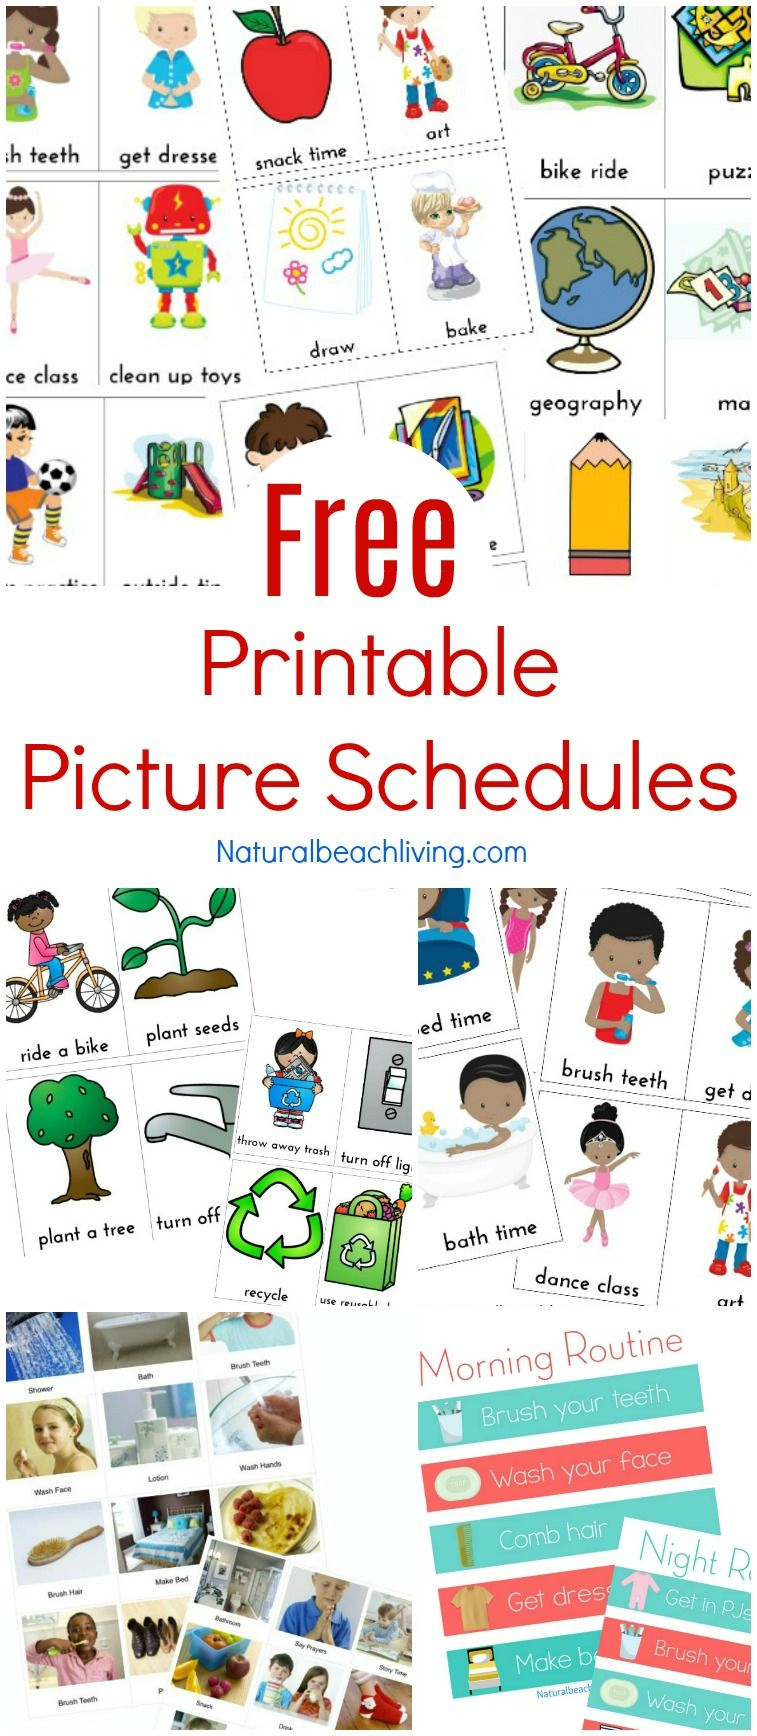 Free Printable Picture Schedule Cards - Visual Schedule Printables - Free Printable Daily Routine Picture Cards